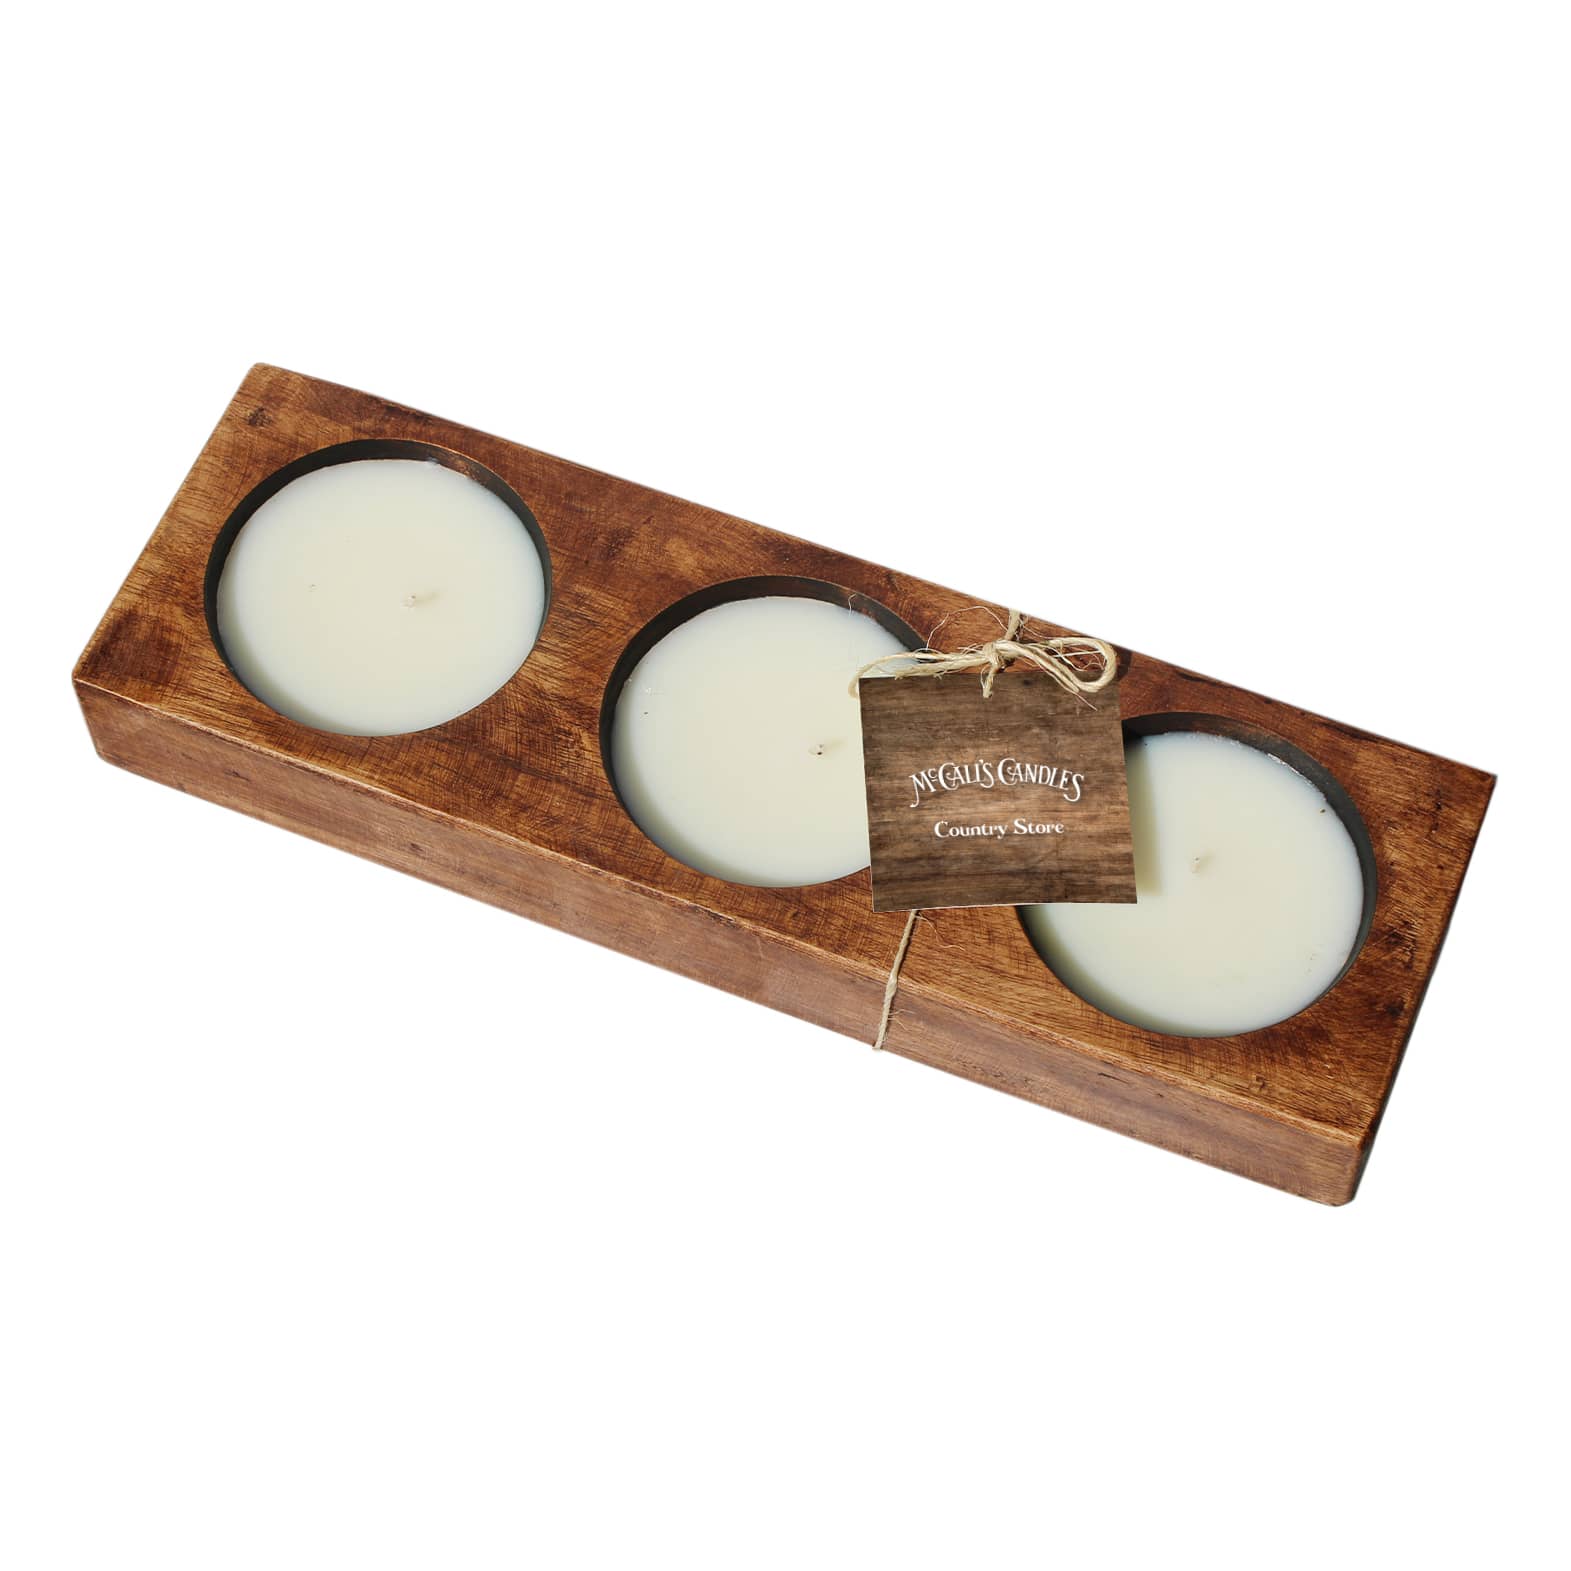 McCall's Cheese Mould Candle - Country Store 